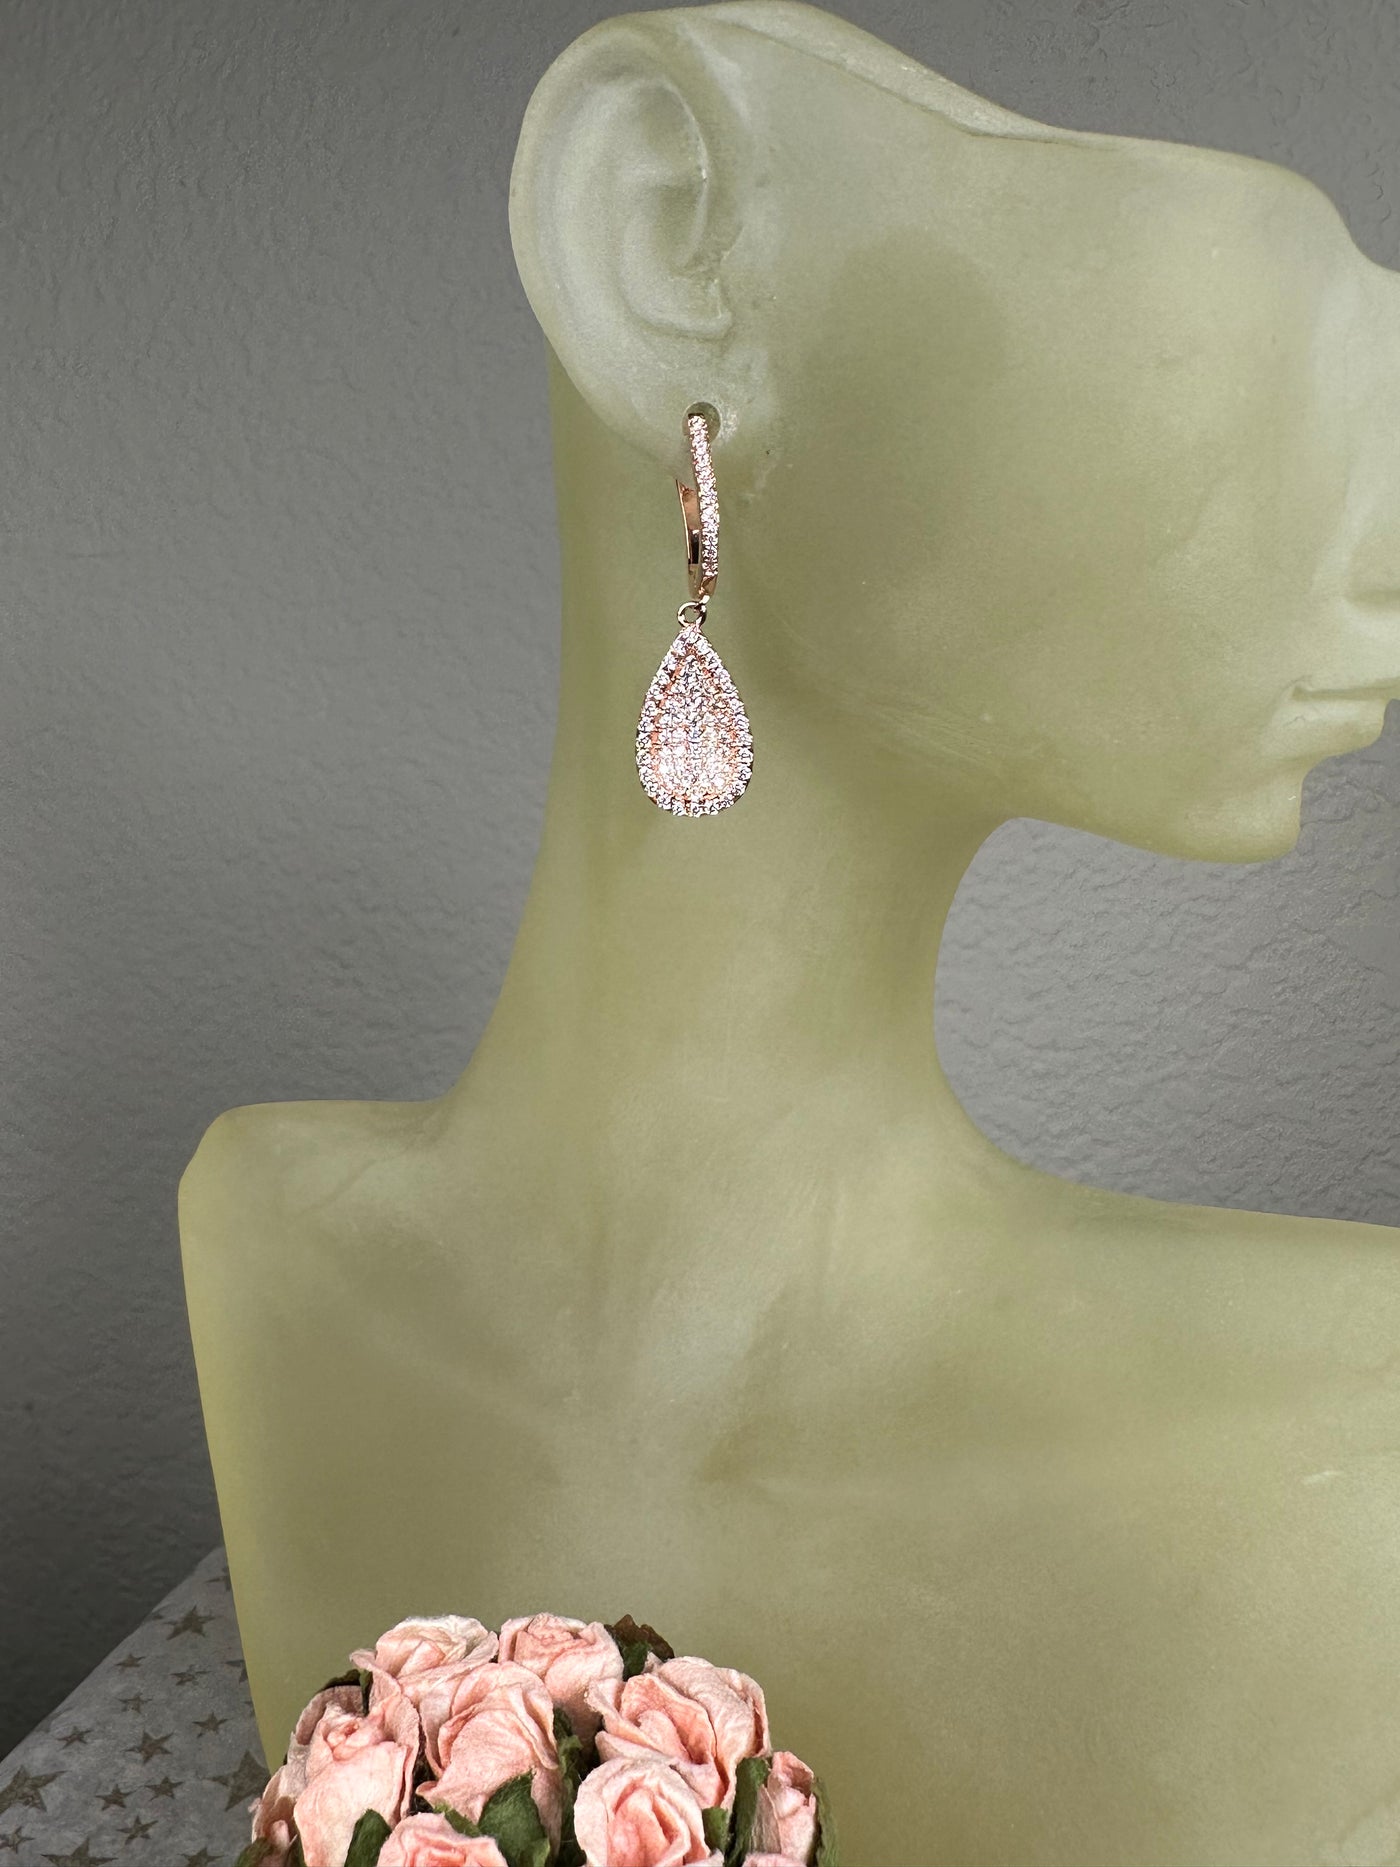 Rose Gold Tone Concave Tear Shape Dangling Earrings with Pave Set Cubic Zirconia